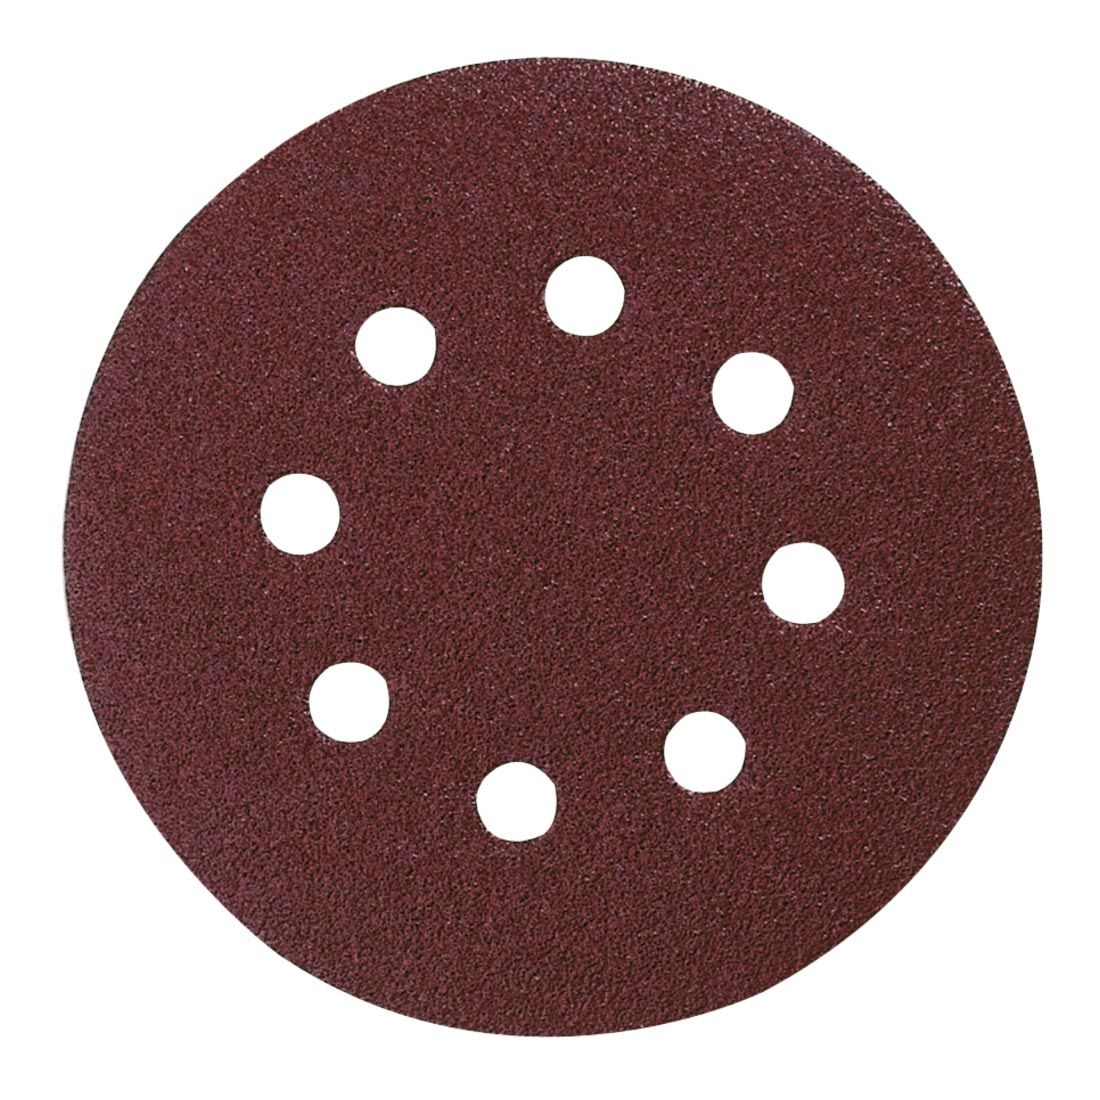 Makita P-43533 Abrasive Disc 125 Punched 40G - Pack of 10